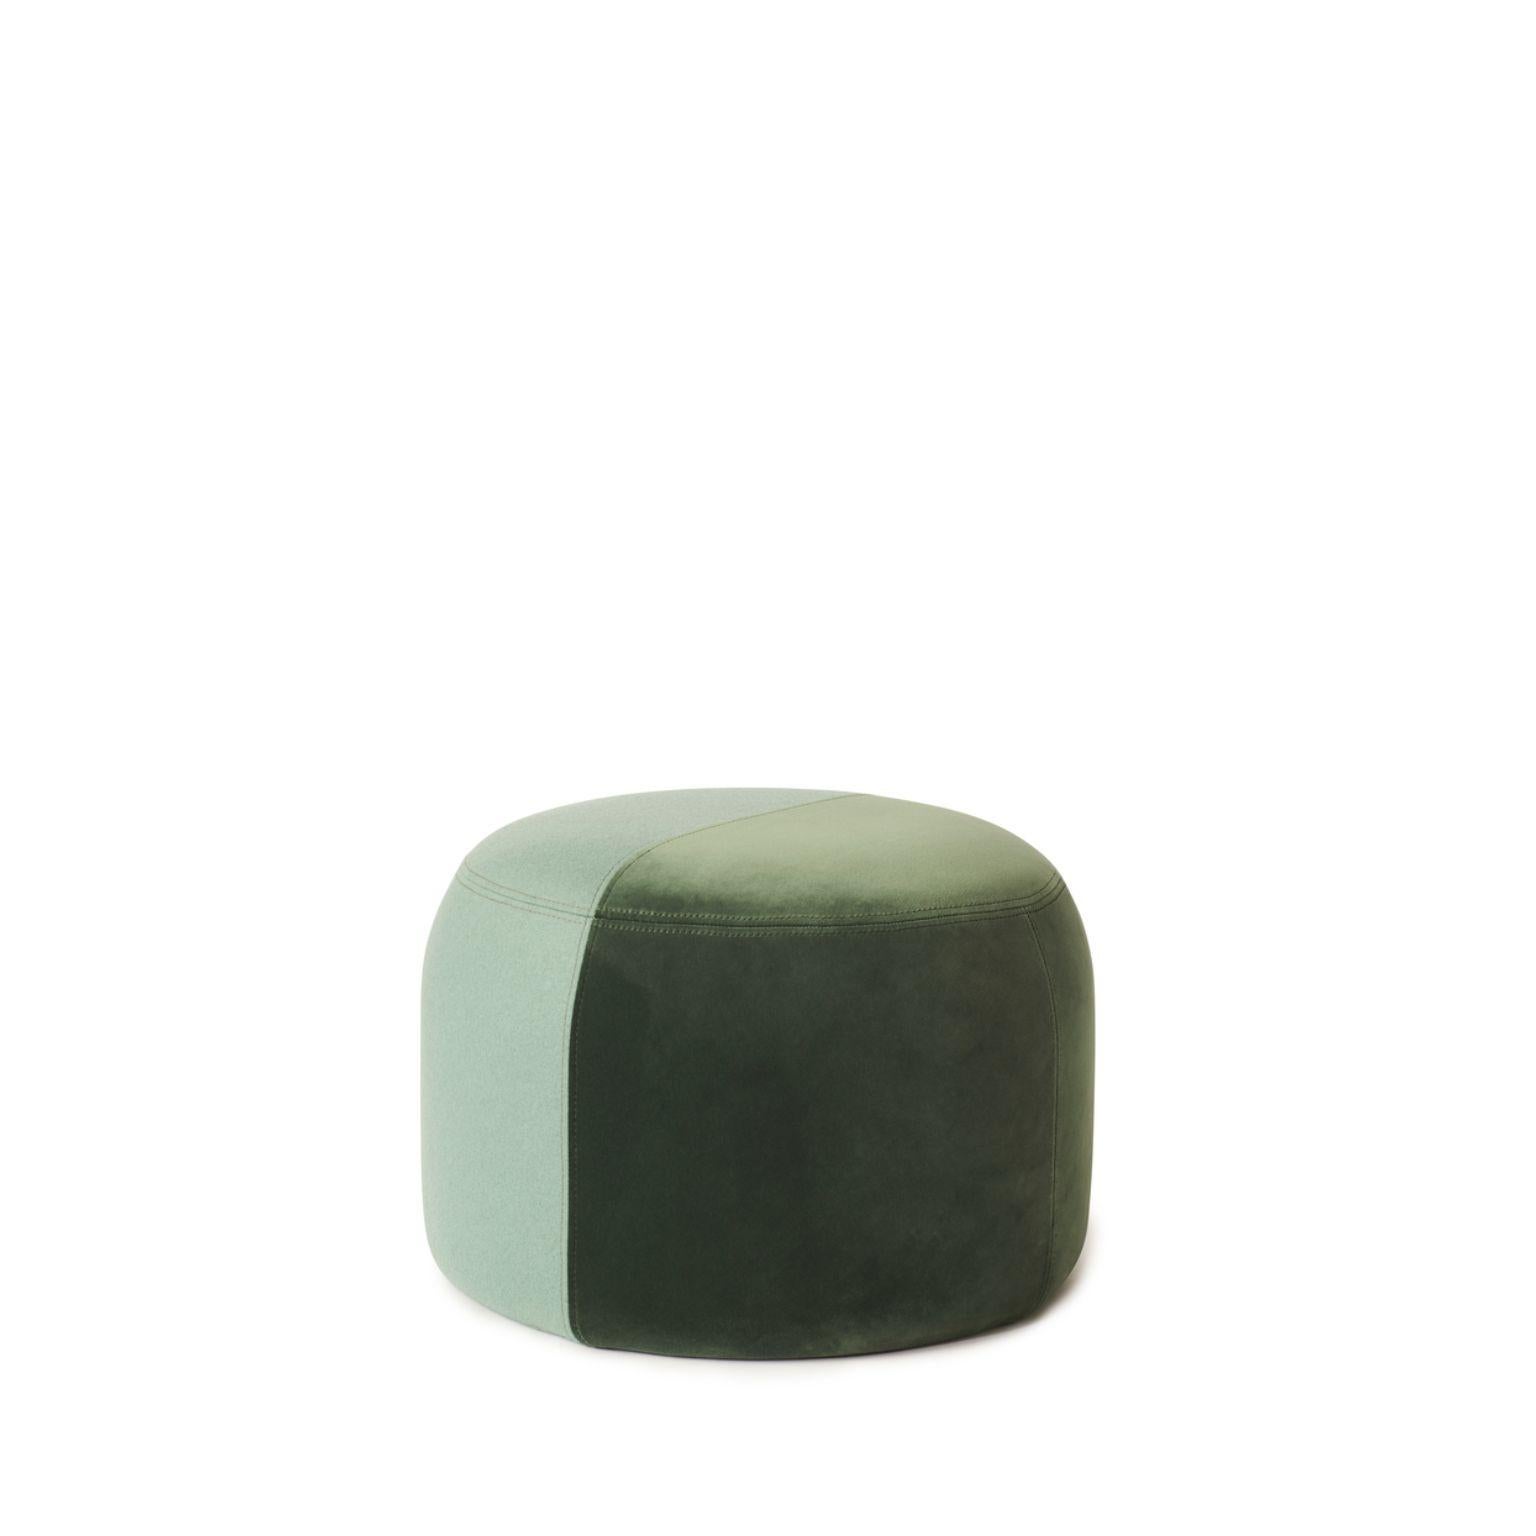 Dainty Pouf jade forest green by Warm Nordic
Dimensions: D 55 x H 39 cm
Material: Textile upholstery, Wooden frame, foam.
Weight: 9.5 kg
Also available in different colours and finishes.

Sophisticated, two-coloured pouf with soft shapes and a